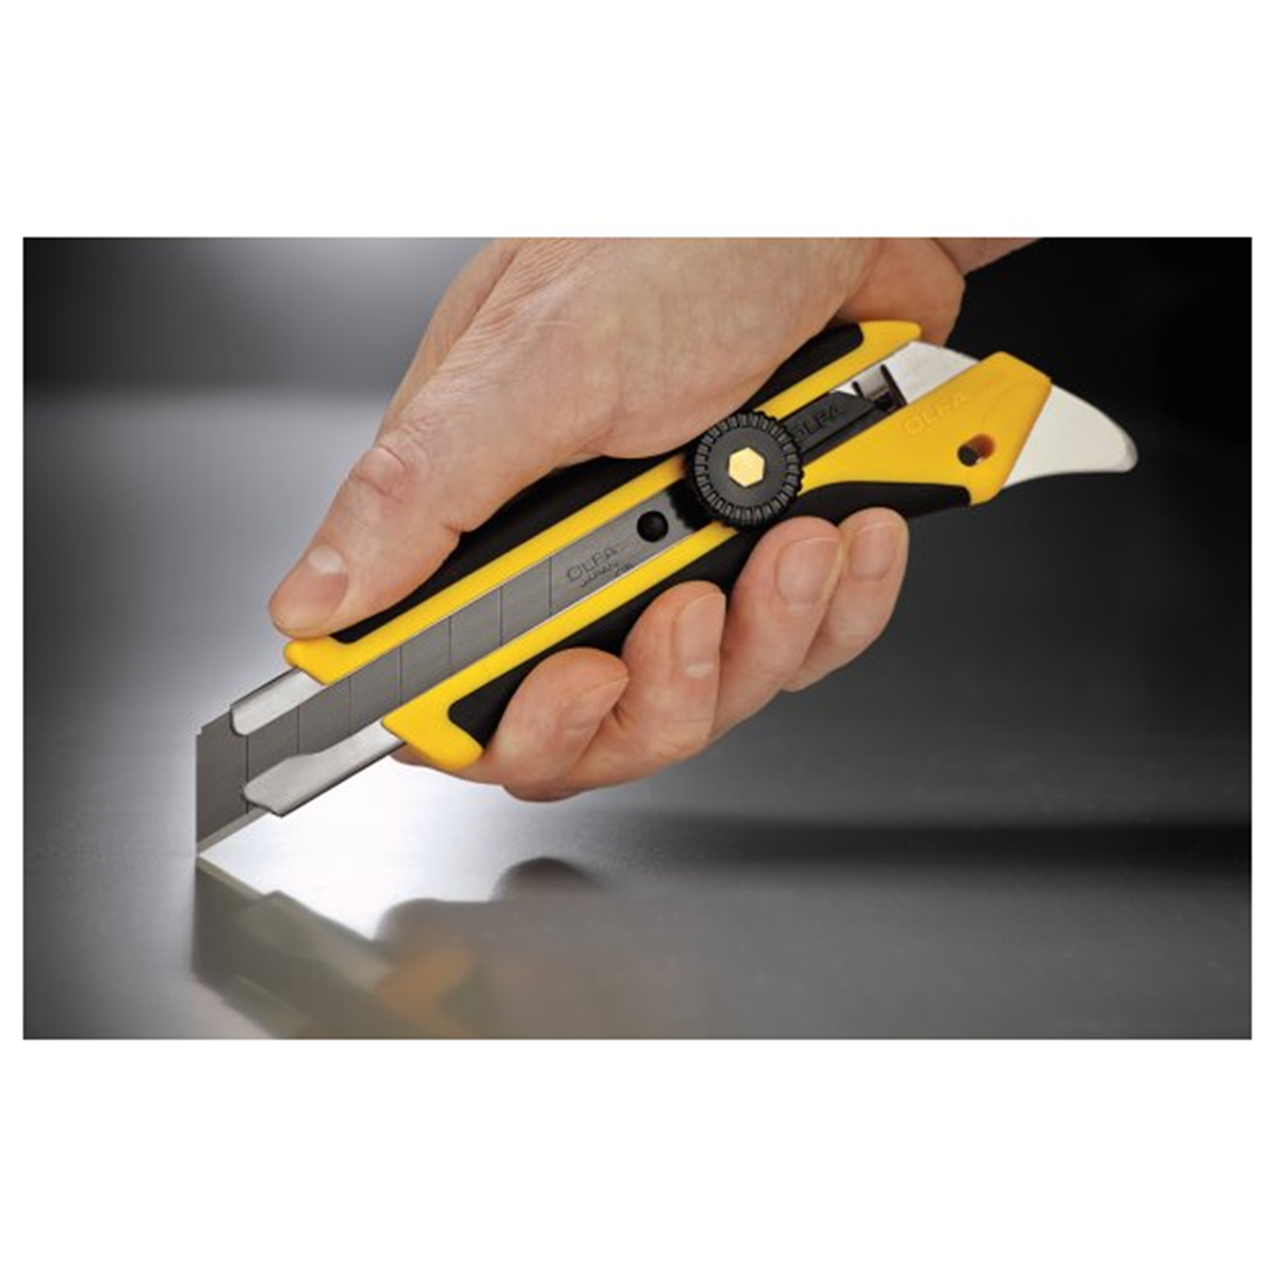 OLFA® Heavy-Duty 18mm Cutter with Extended Blade Channel and Carpet Tuck  (OL)